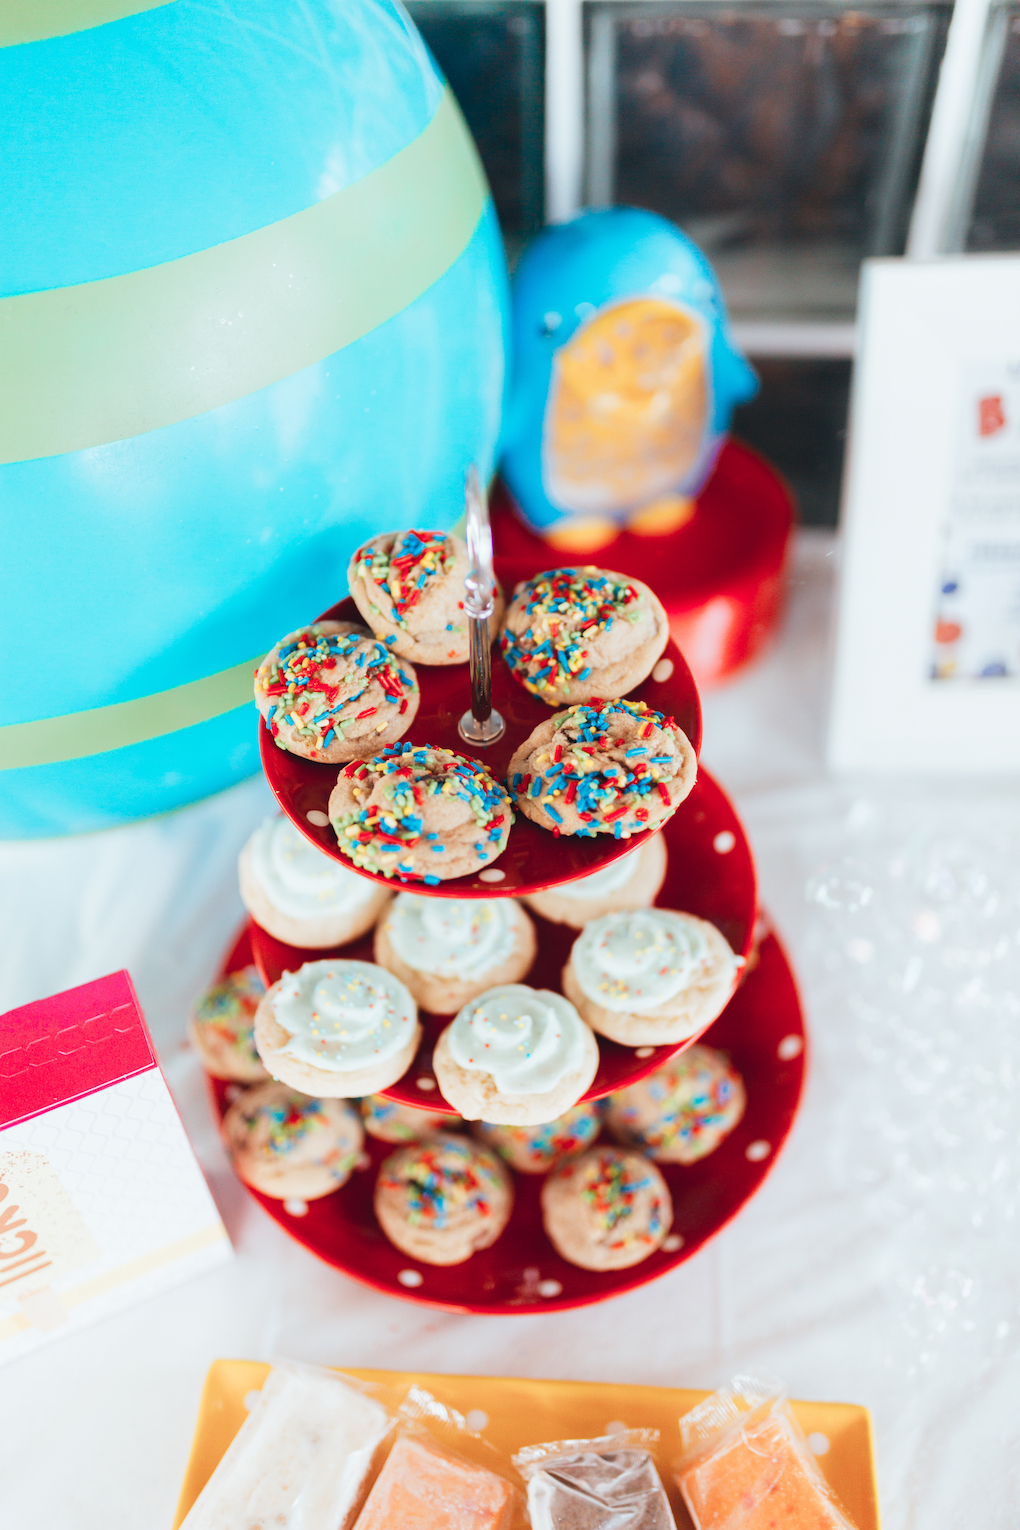 KINGS HAPPY UN-BIRTHDAY - KIDS BALL PARTY by Utah blogger Dani Marie - Red Yellow Green Blue Chocolate Chip Cookies and Sugar Cookies